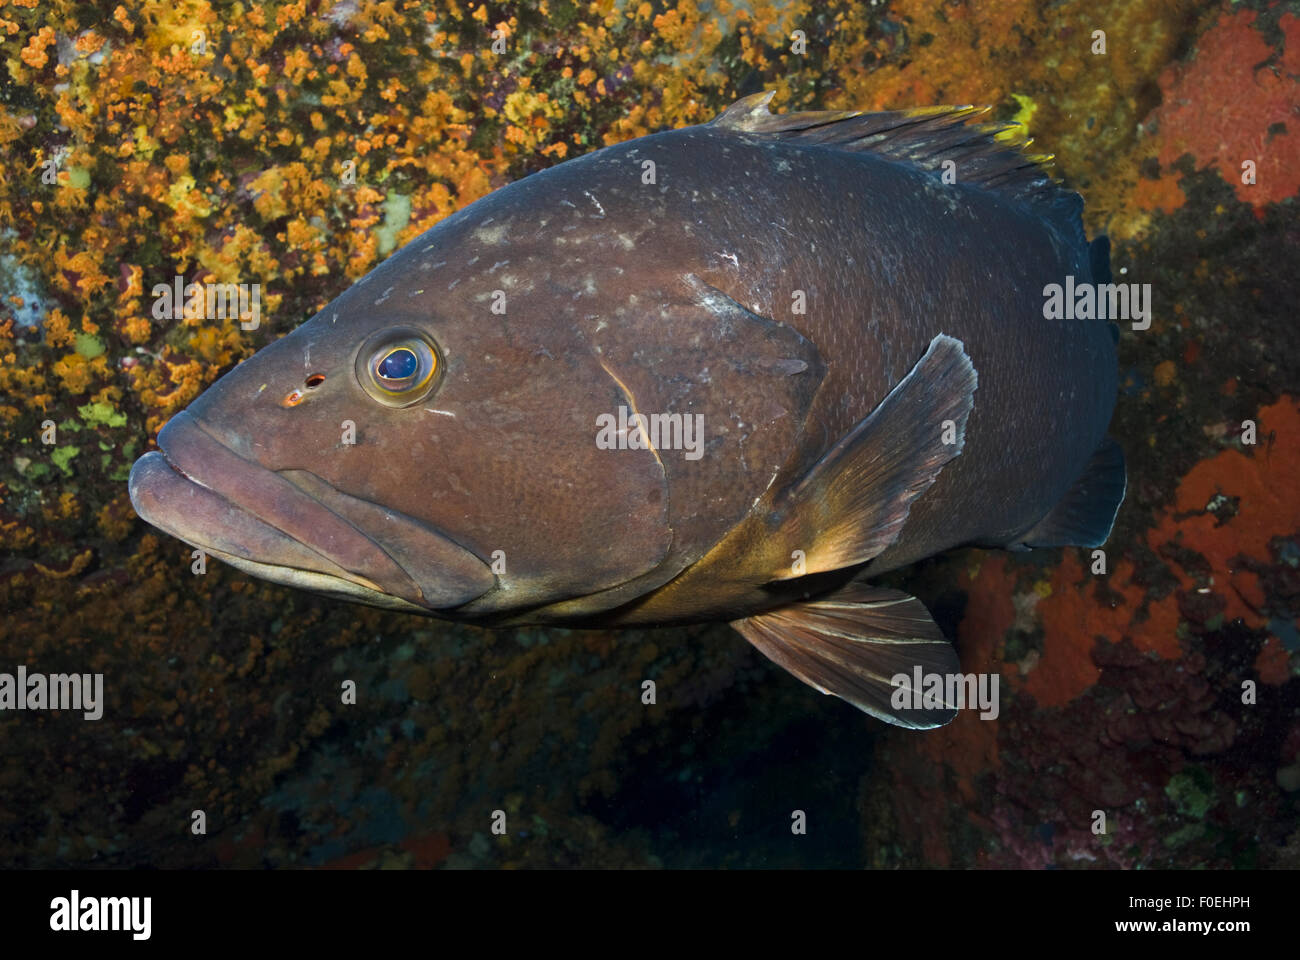 Dusky grouper (Epinephelus marginatus) with numerous fish lice (parasitic copepods) on its head, by rocks covered with Yellow encrusting anemones (Parazoanthus axinellae) and sponges, 'Merouville' ('grouper City') Lavezzi Islands, Corsica, France, Septemb Stock Photo